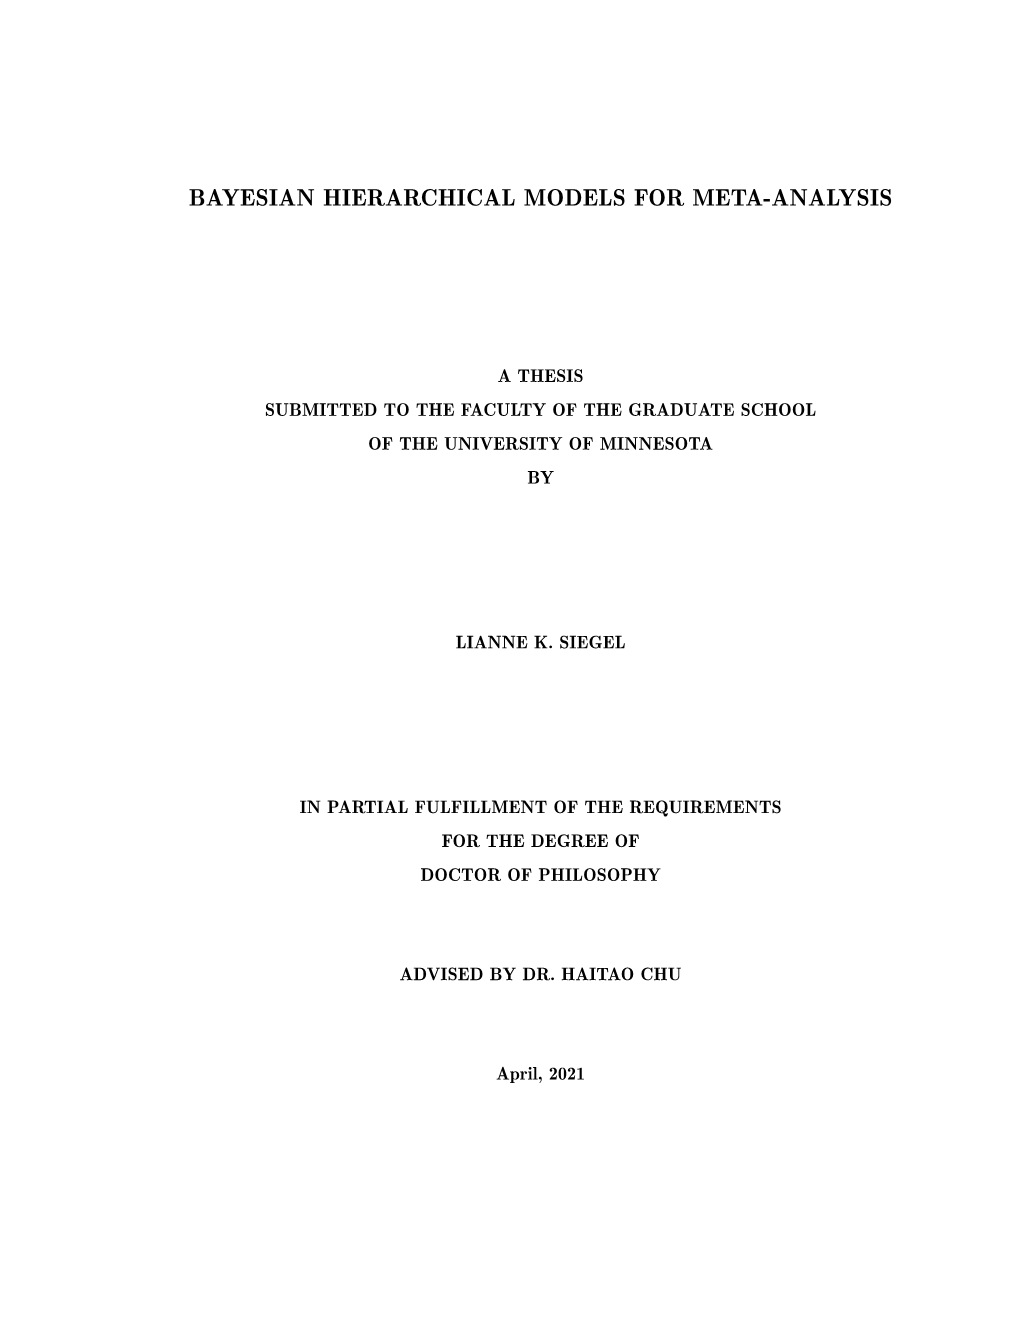 Bayesian Hierarchical Models for Meta-Analysis